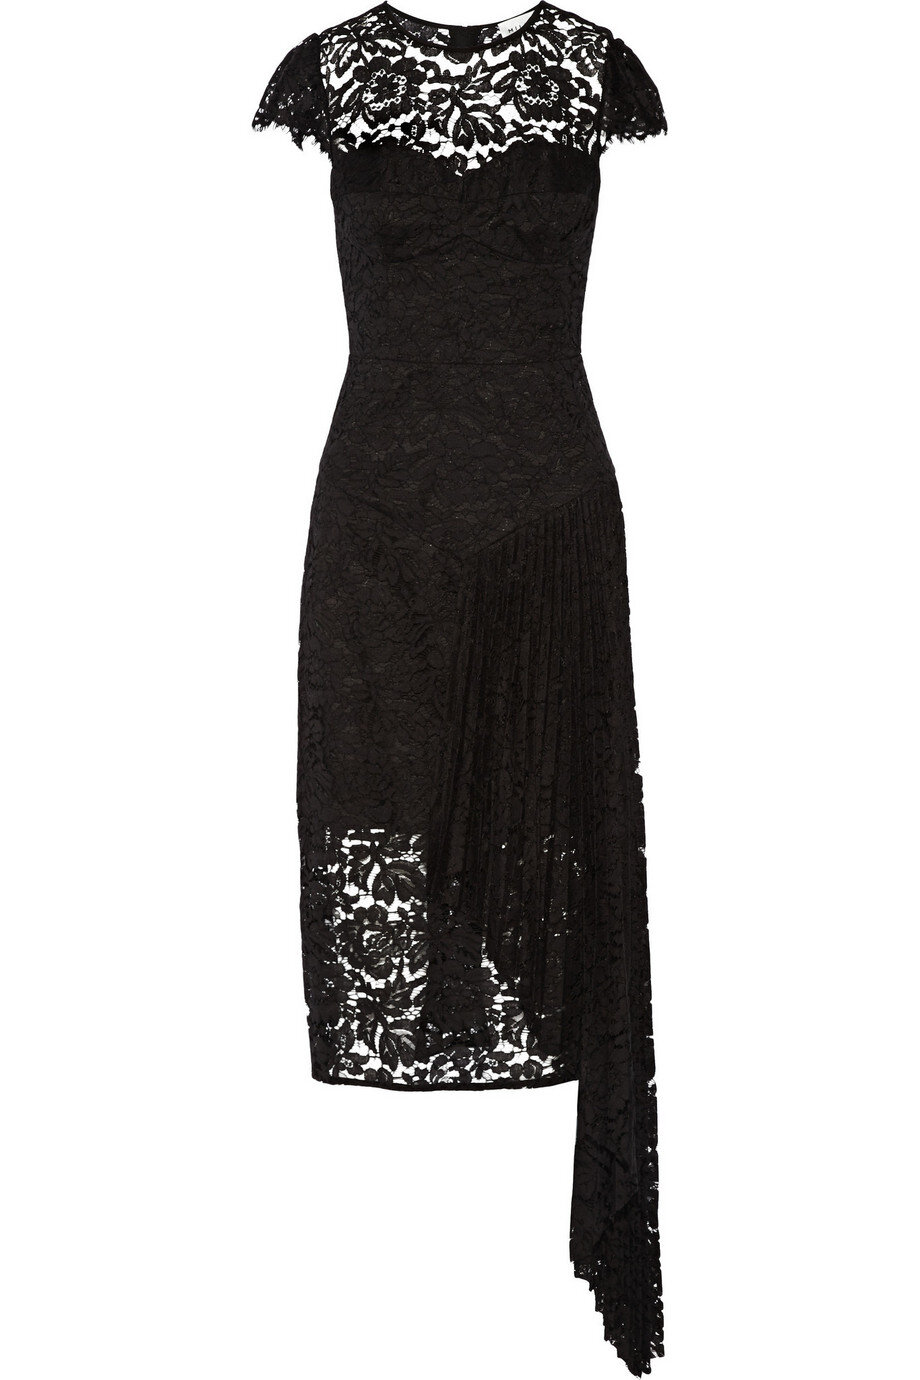 Milly Margaret Asymmetrical Lace Dress in Black — UFO No More